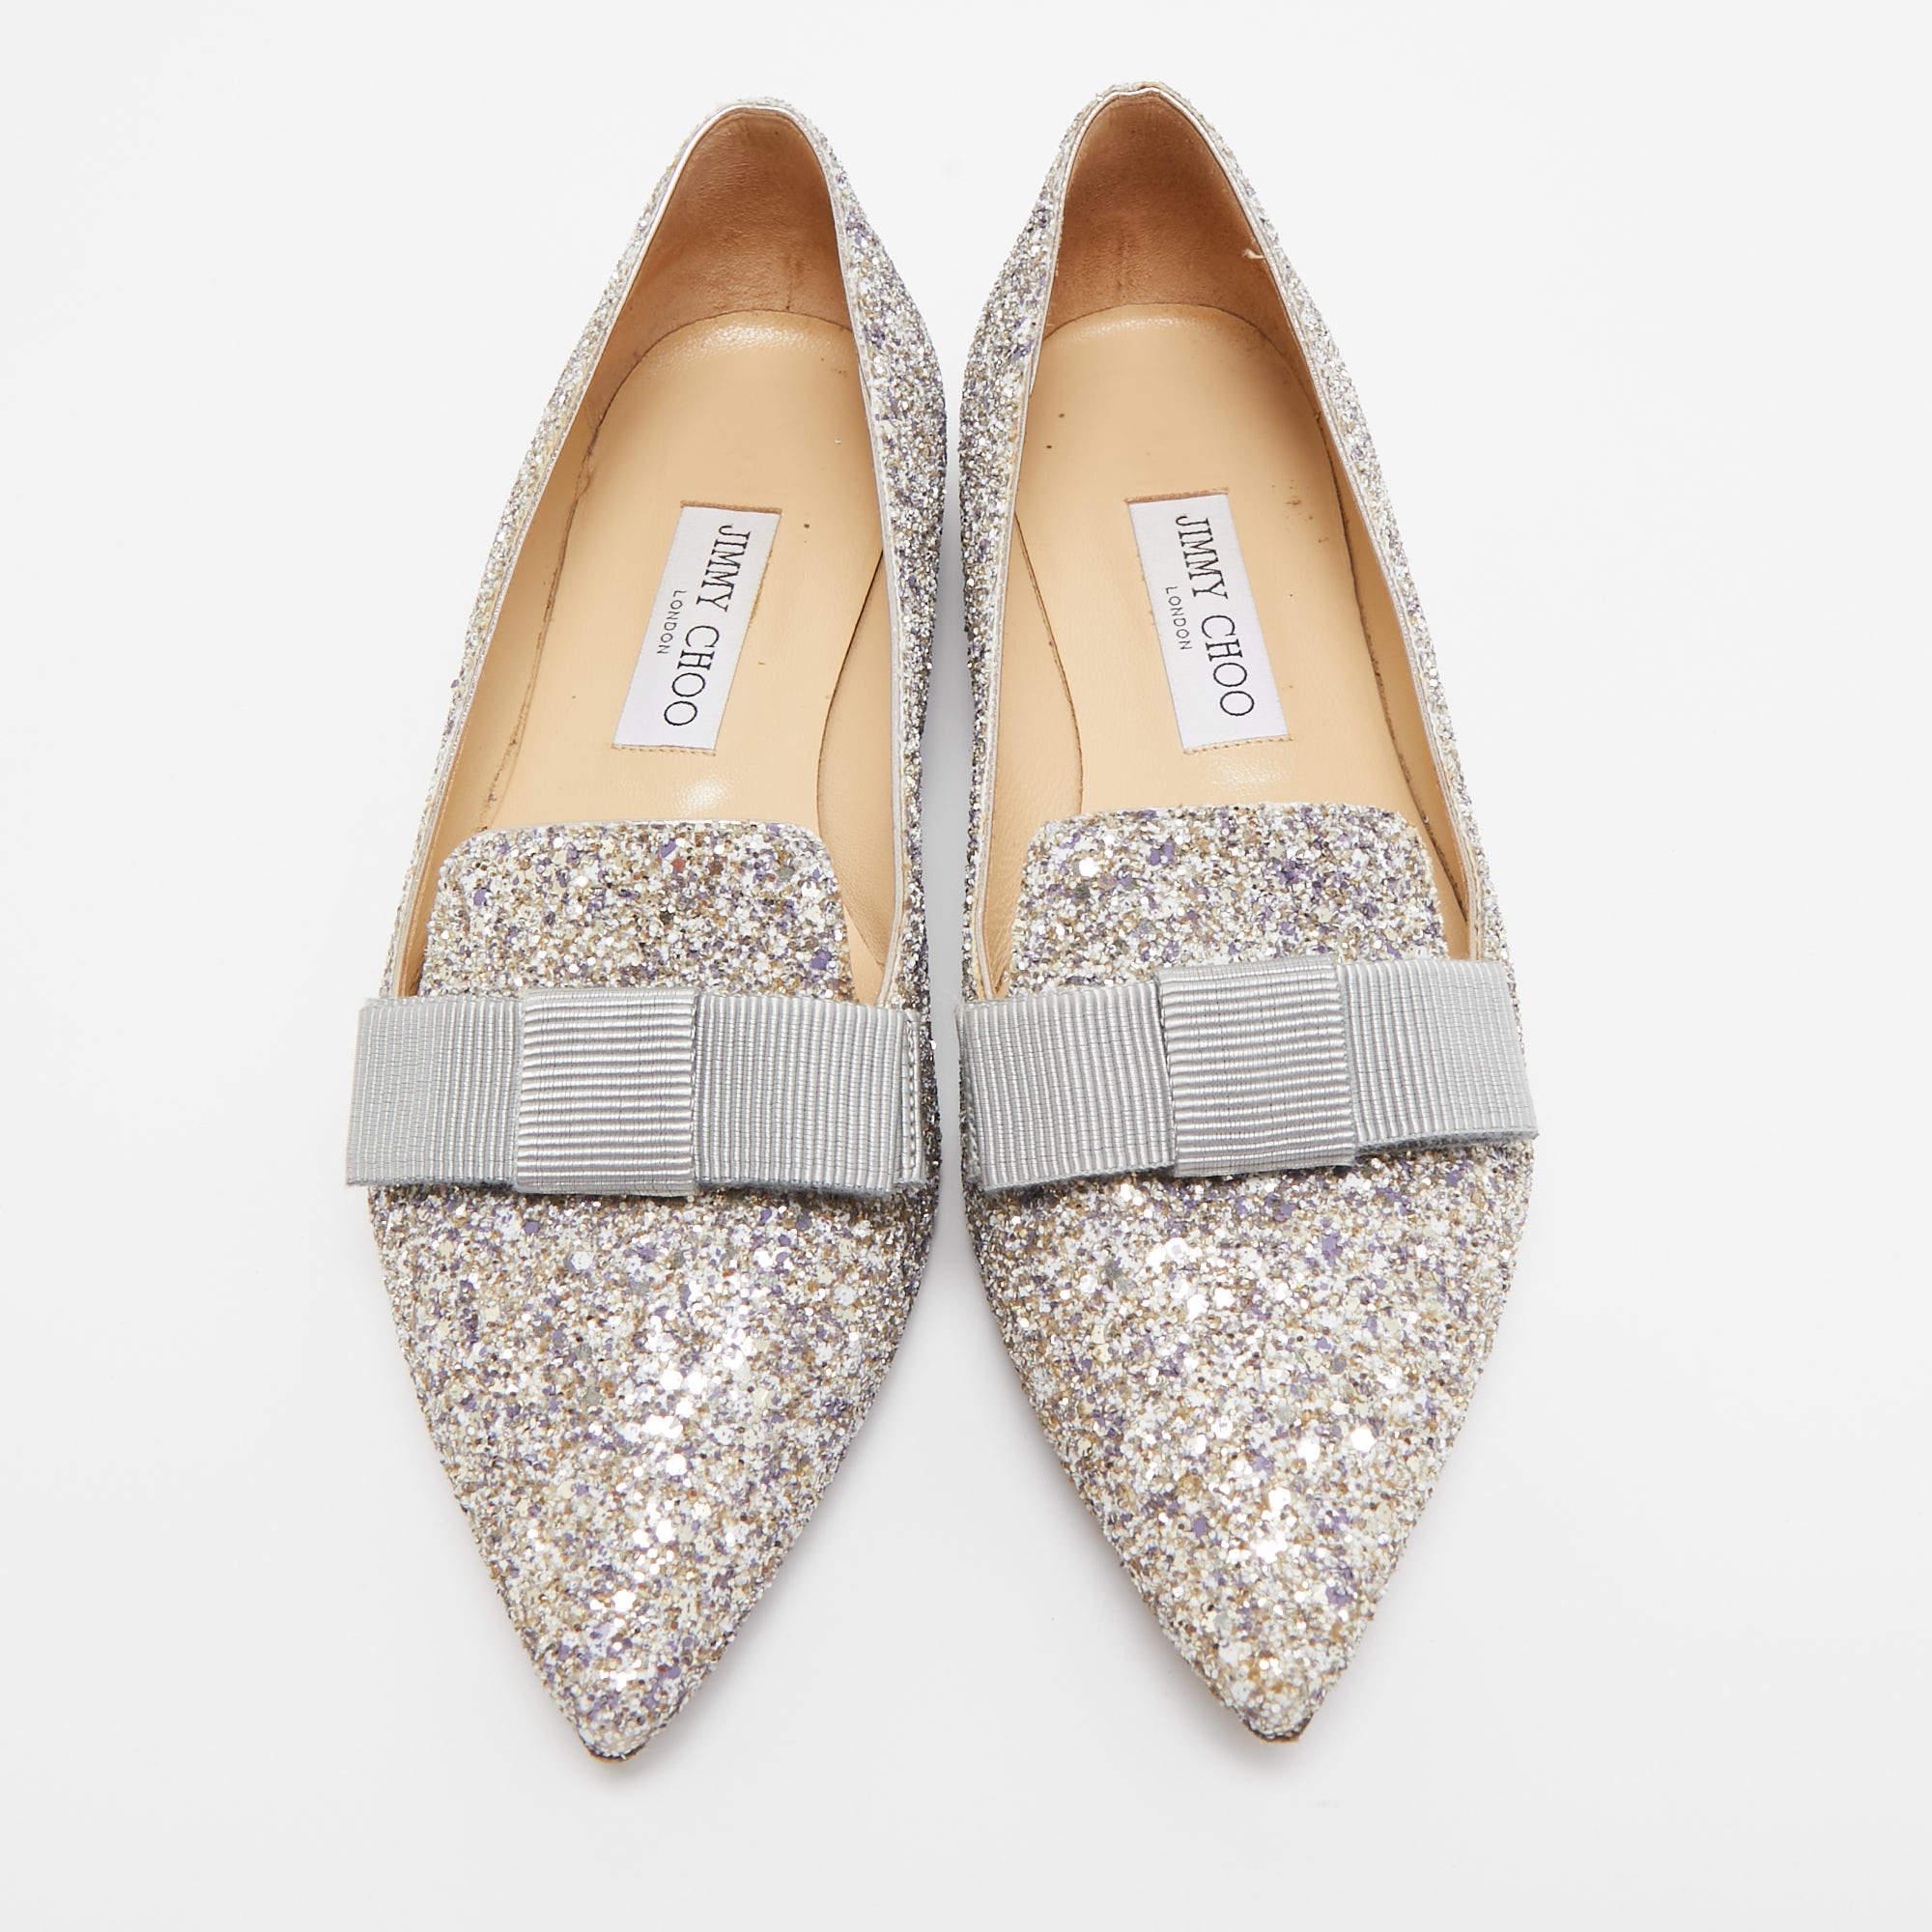 Coming from one of the most celebrated fashion house, these Jimmy Choo ballet flats are known for their brilliant craftsmanship. A seamless mix of comfort and style, these smoking slippers will add a refined touch to your ensemble without too much